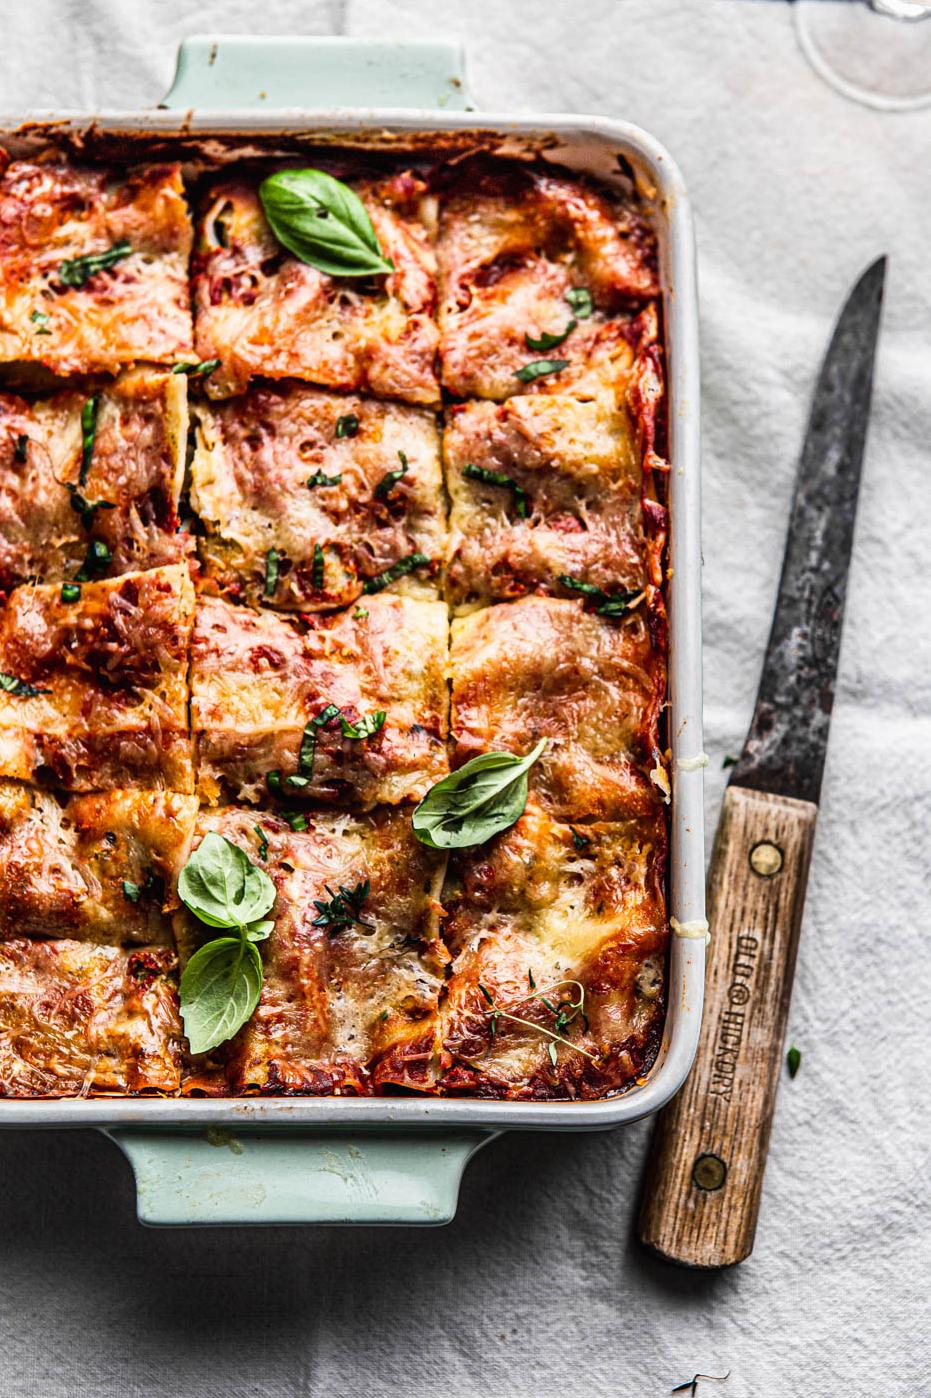  Layers upon layers of delicious veggies and gluten-free noodles, this lasagna is simply divinely healthy!